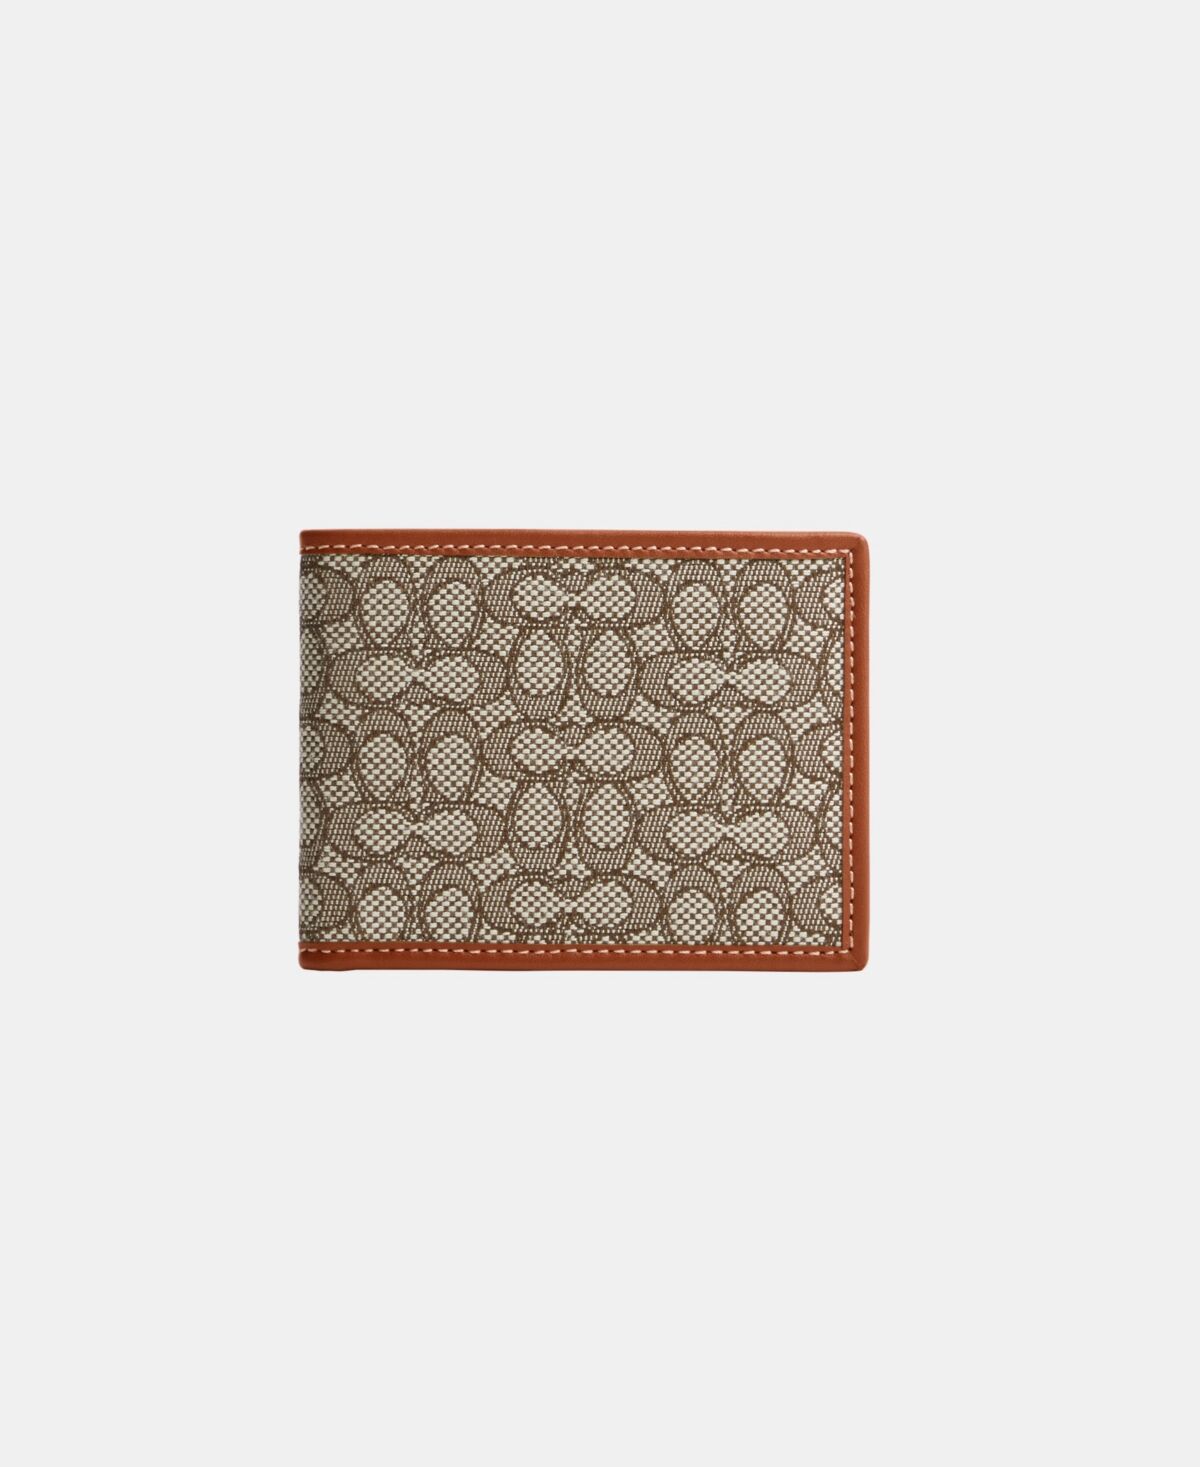 Coach Men's Leather Slim Billfold Wallet in Micro Signature Jacquard - Cocoa, Burnished Amber